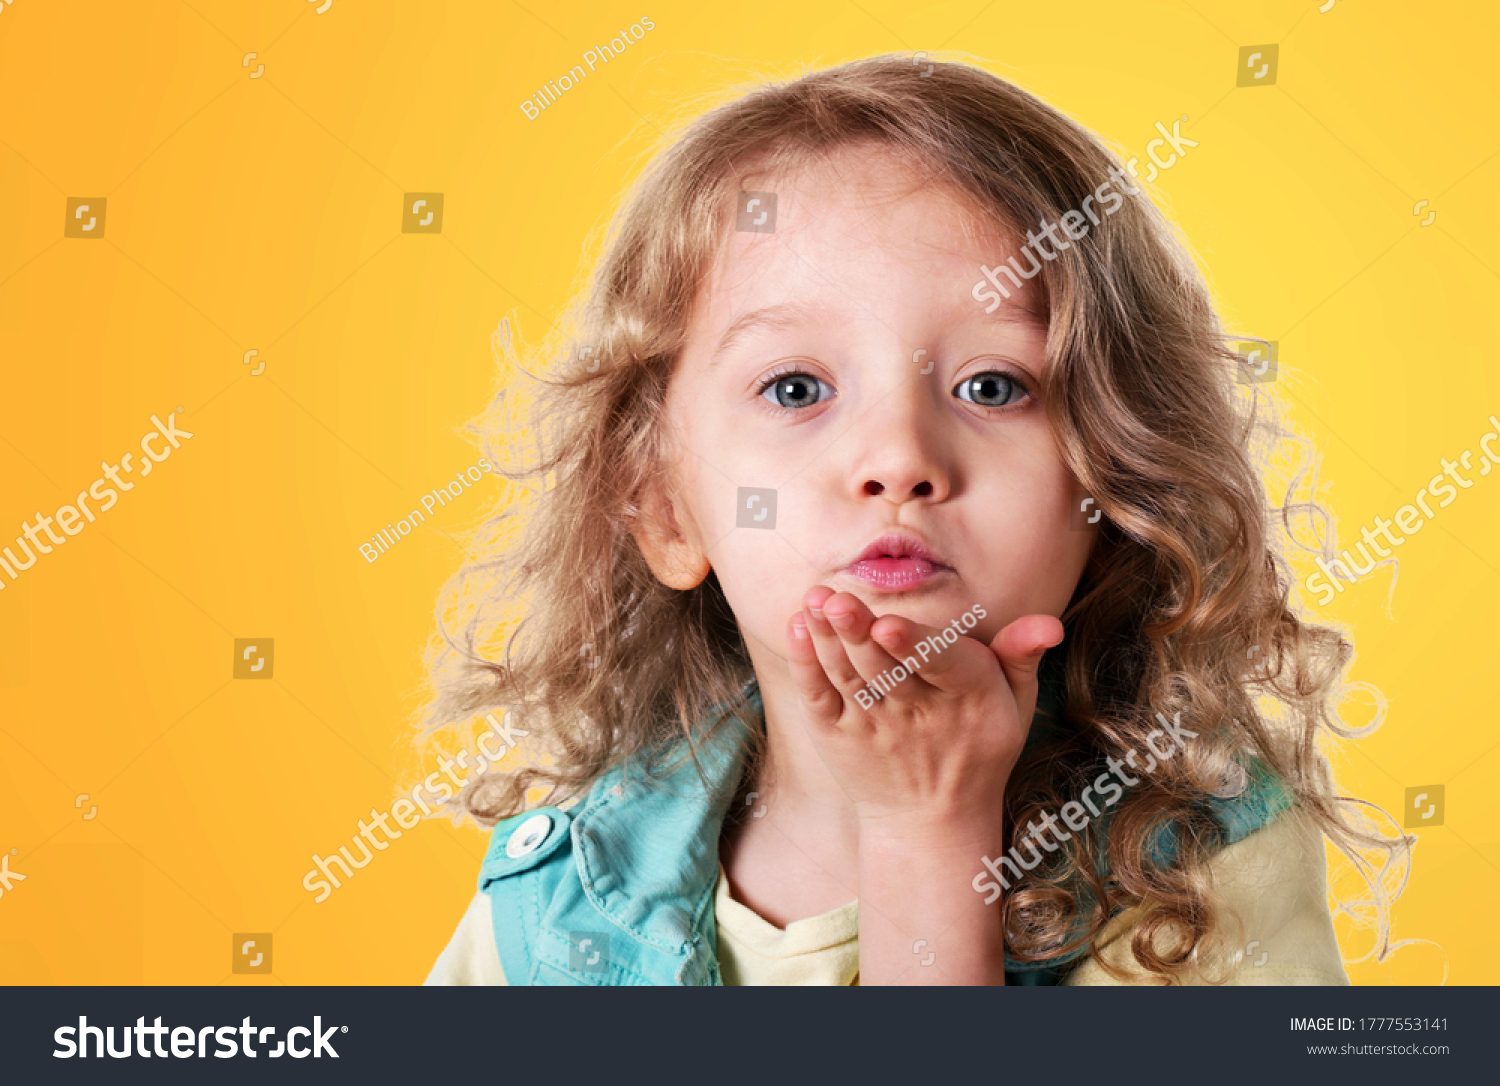 Laughing Cute Small Girl On Colored库存照片1777553141 Shutterstock